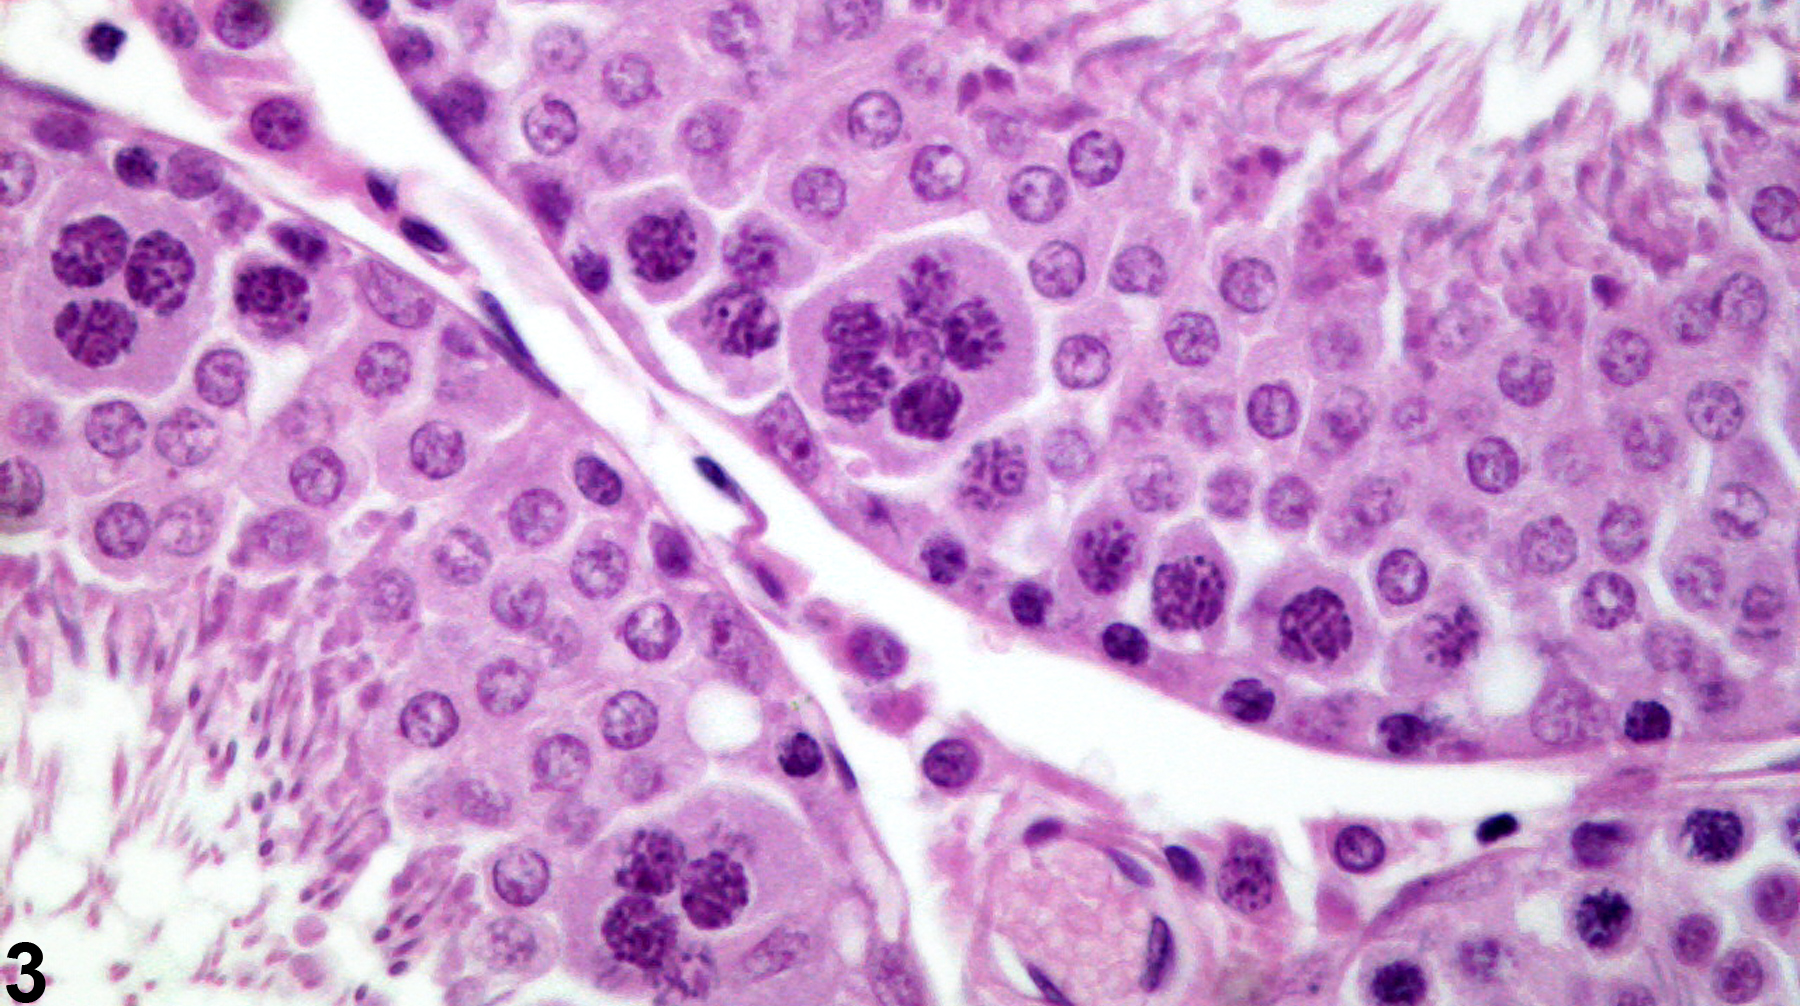 Image of seminiferous tubule giant cells in the testis from a male Harlan Sprague-Dawley rat